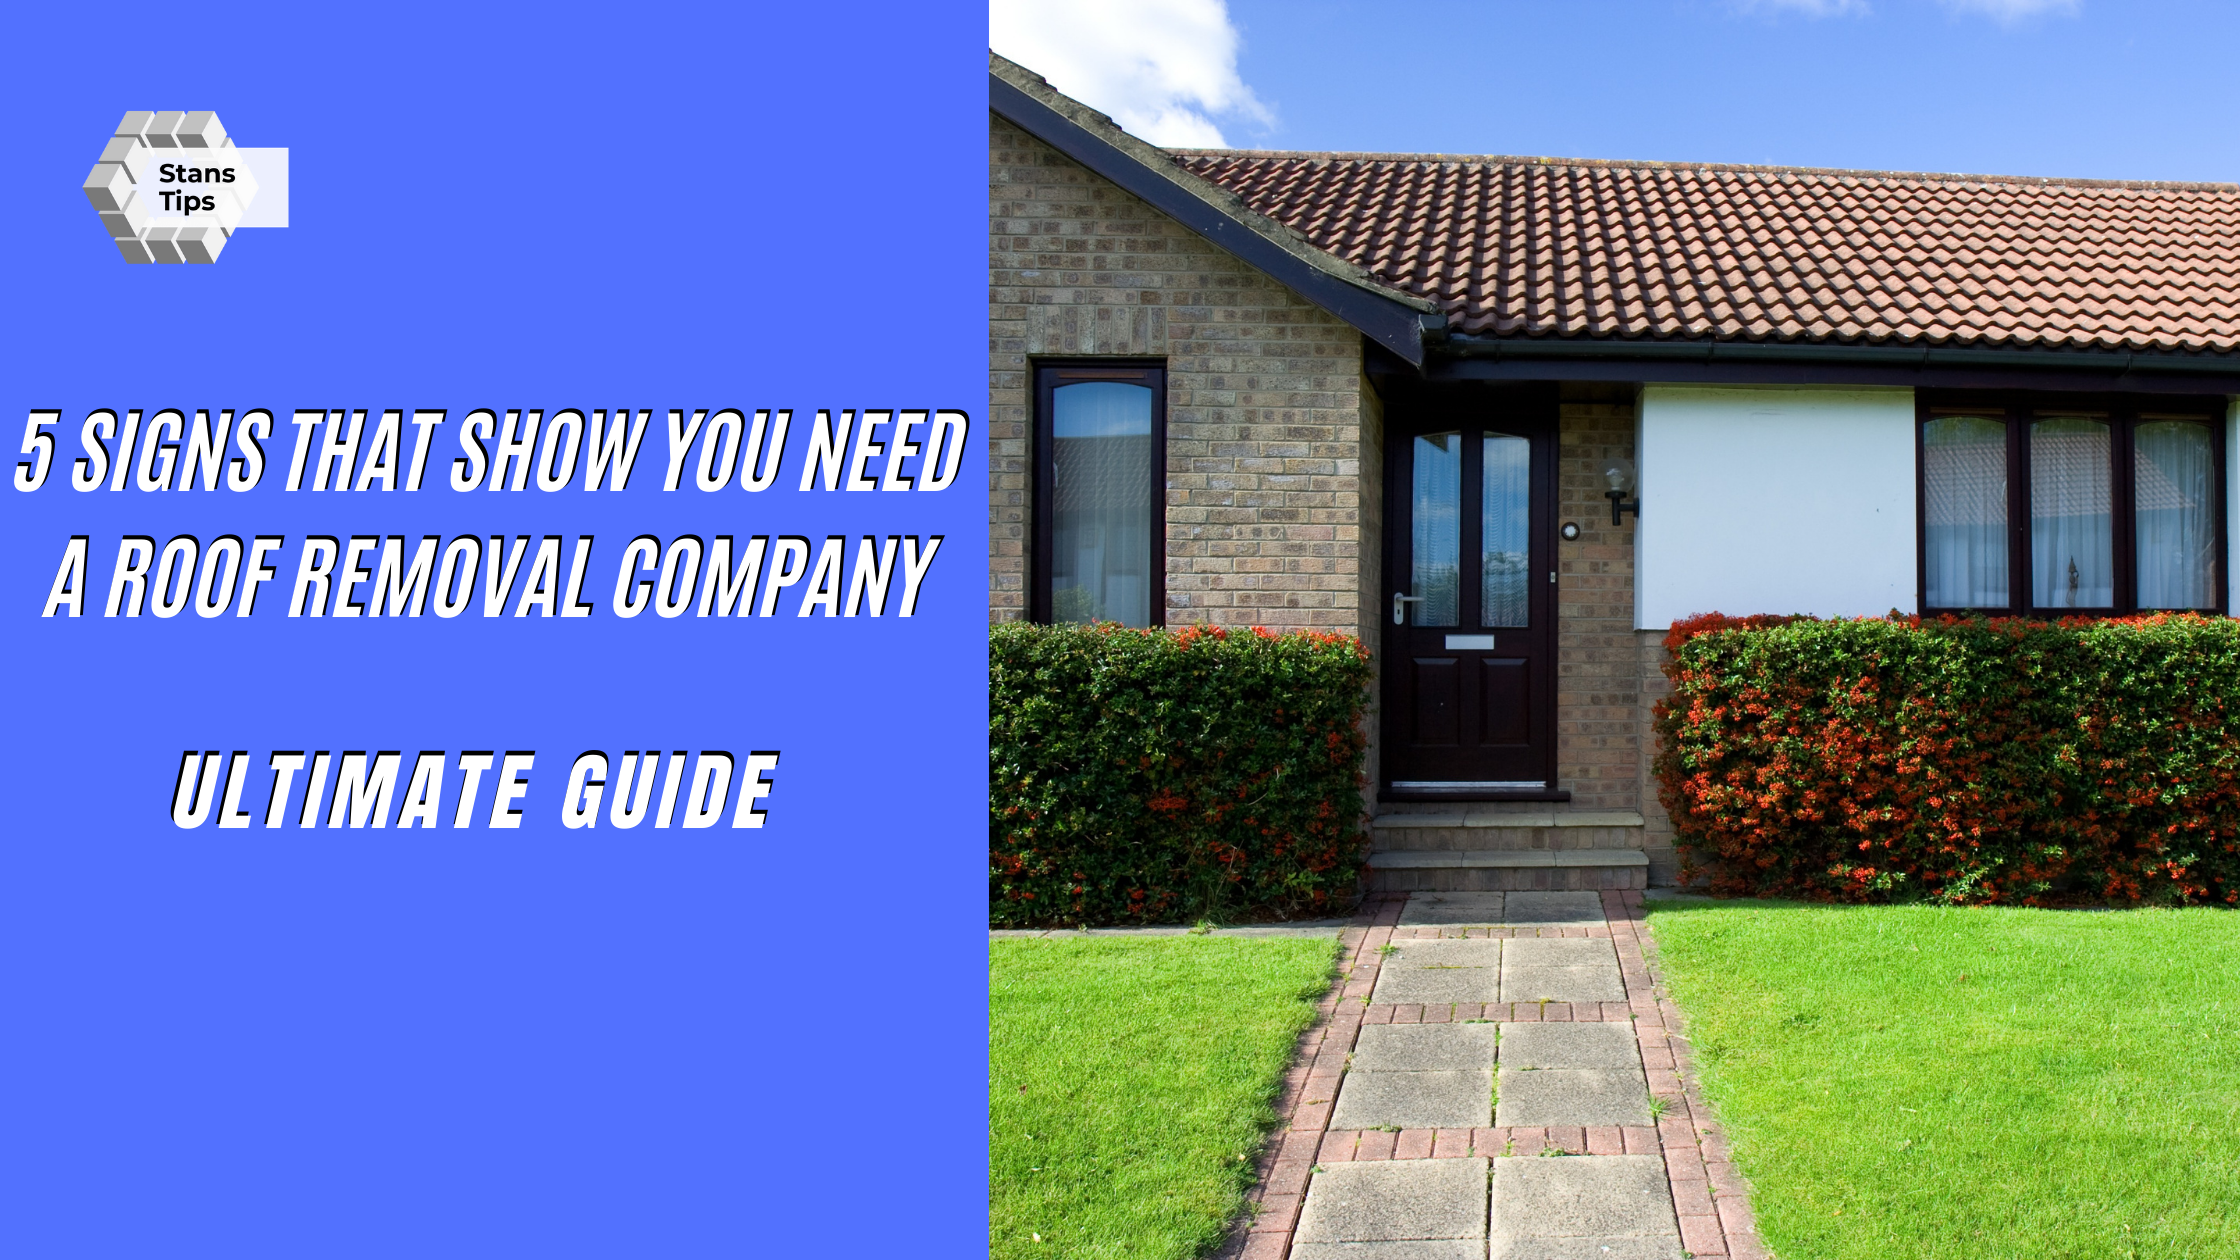 5 Signs that show you need a roof removal company